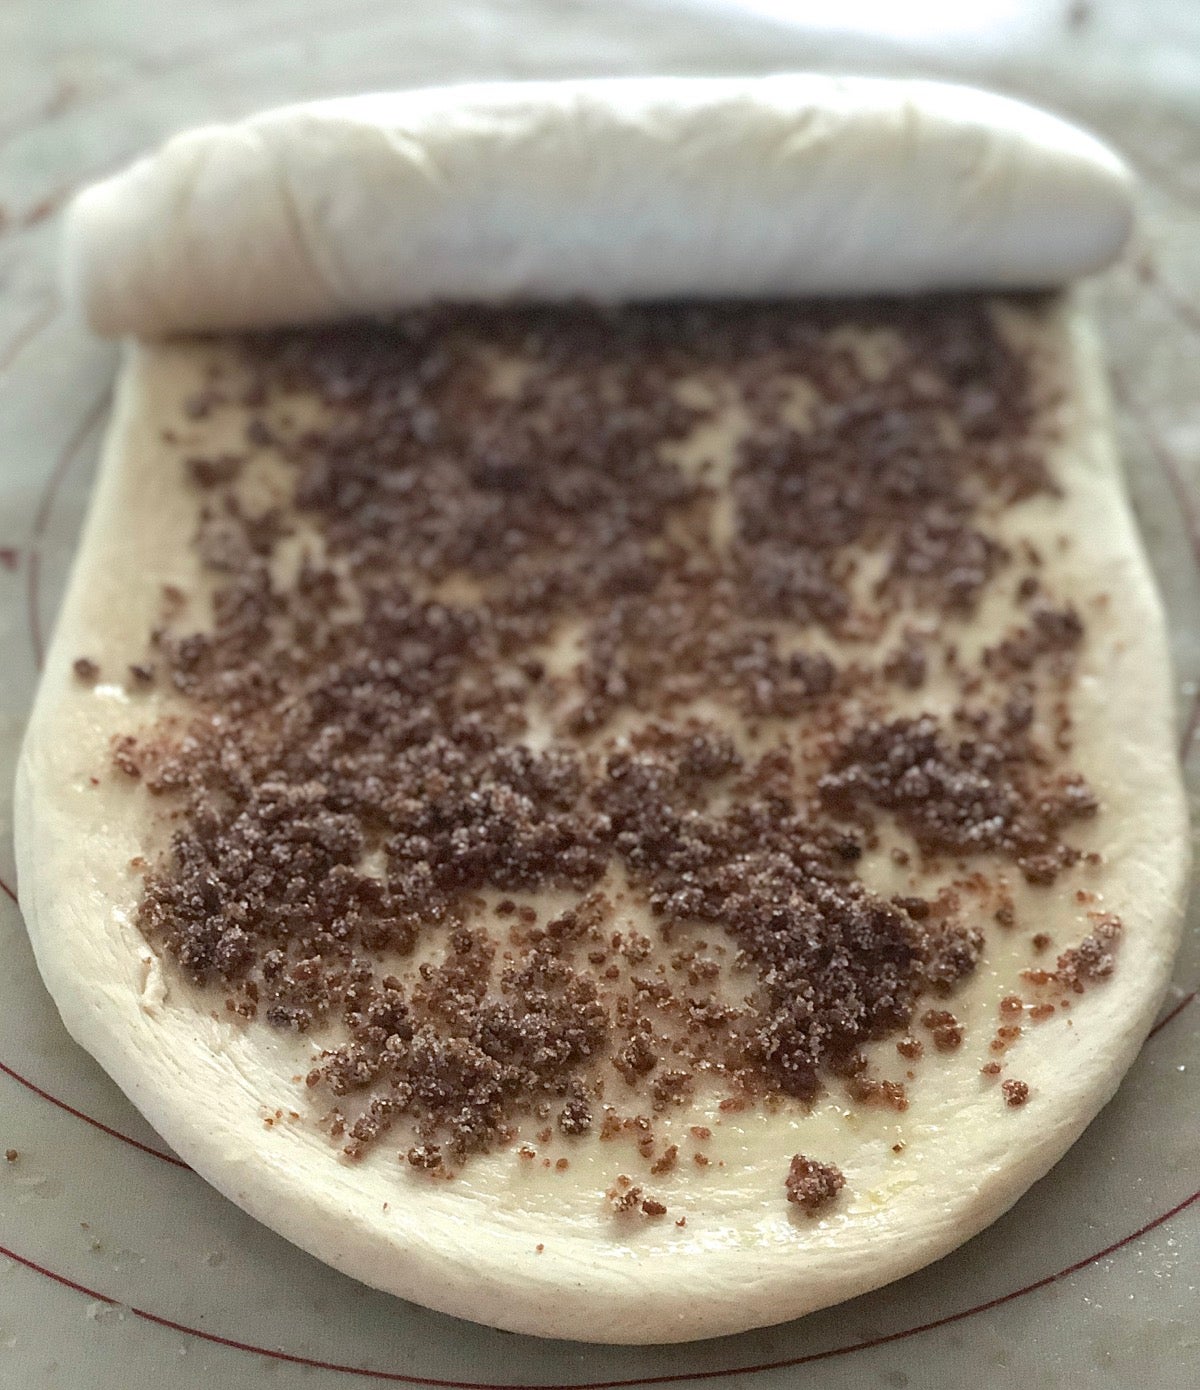 The dough for a cinnamon swirl loaf, sprinkled with filling and being rolled into a log.